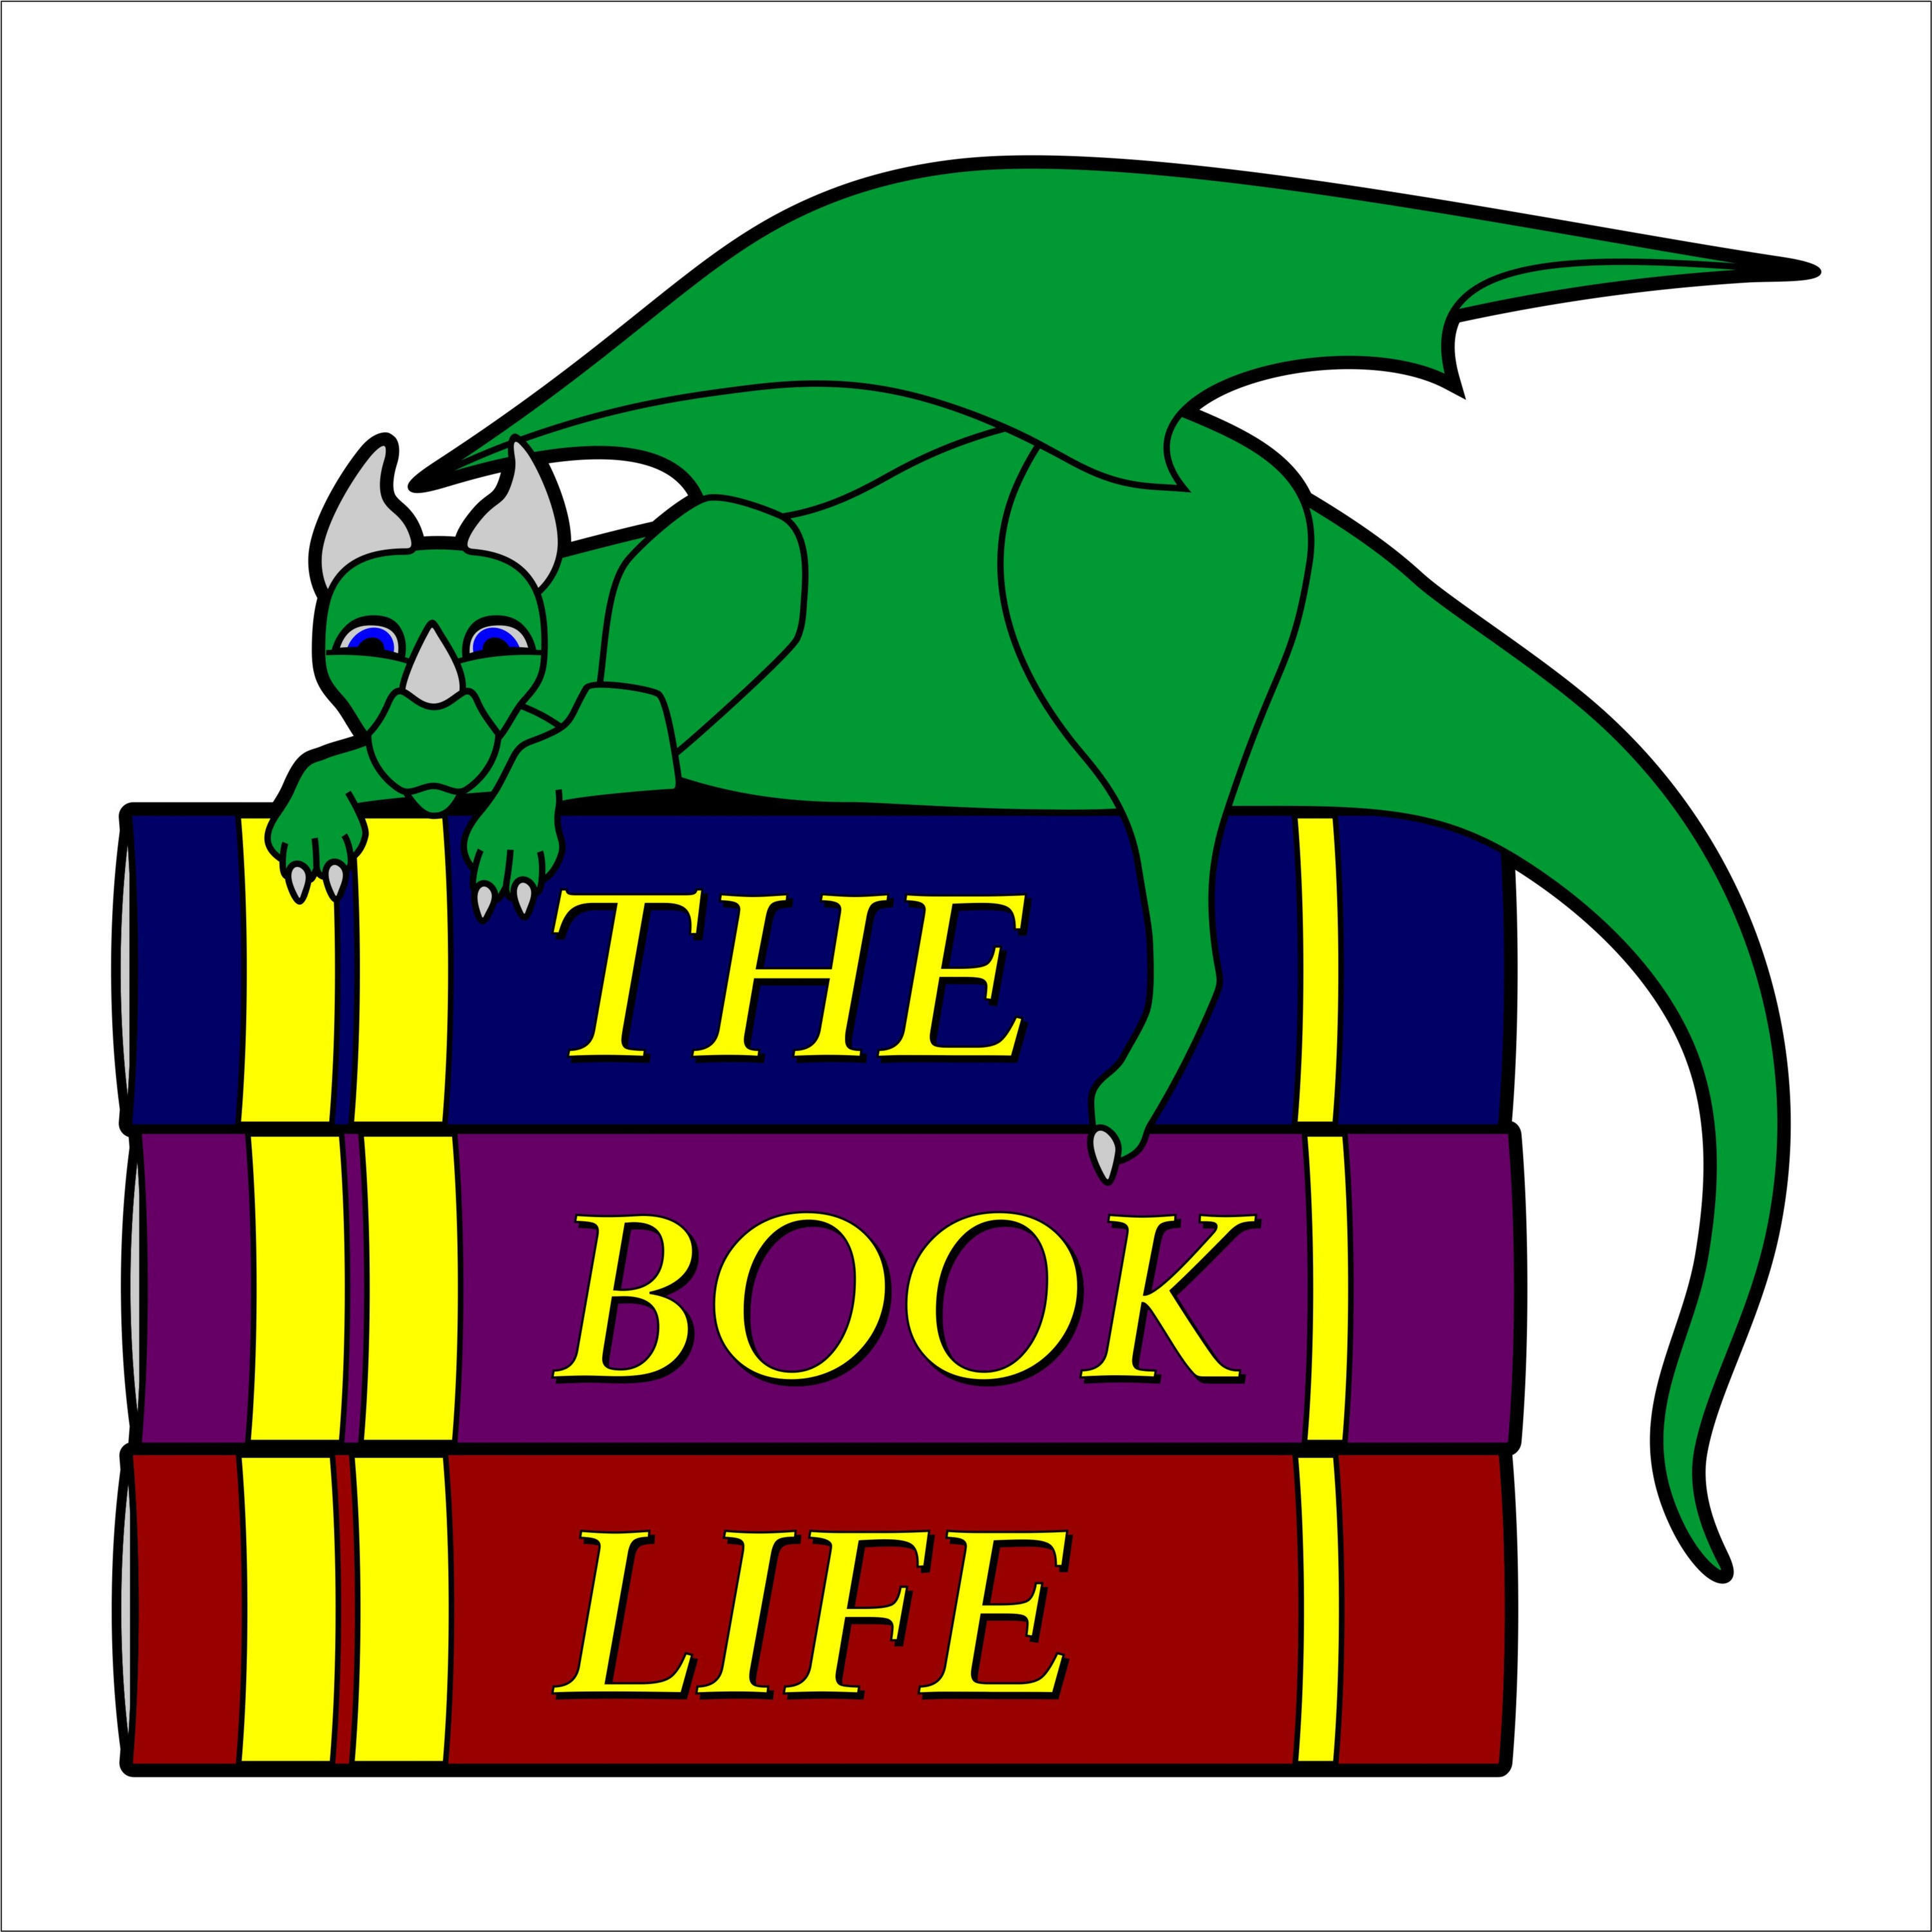 The good life book. Book is Life. The book of Life.